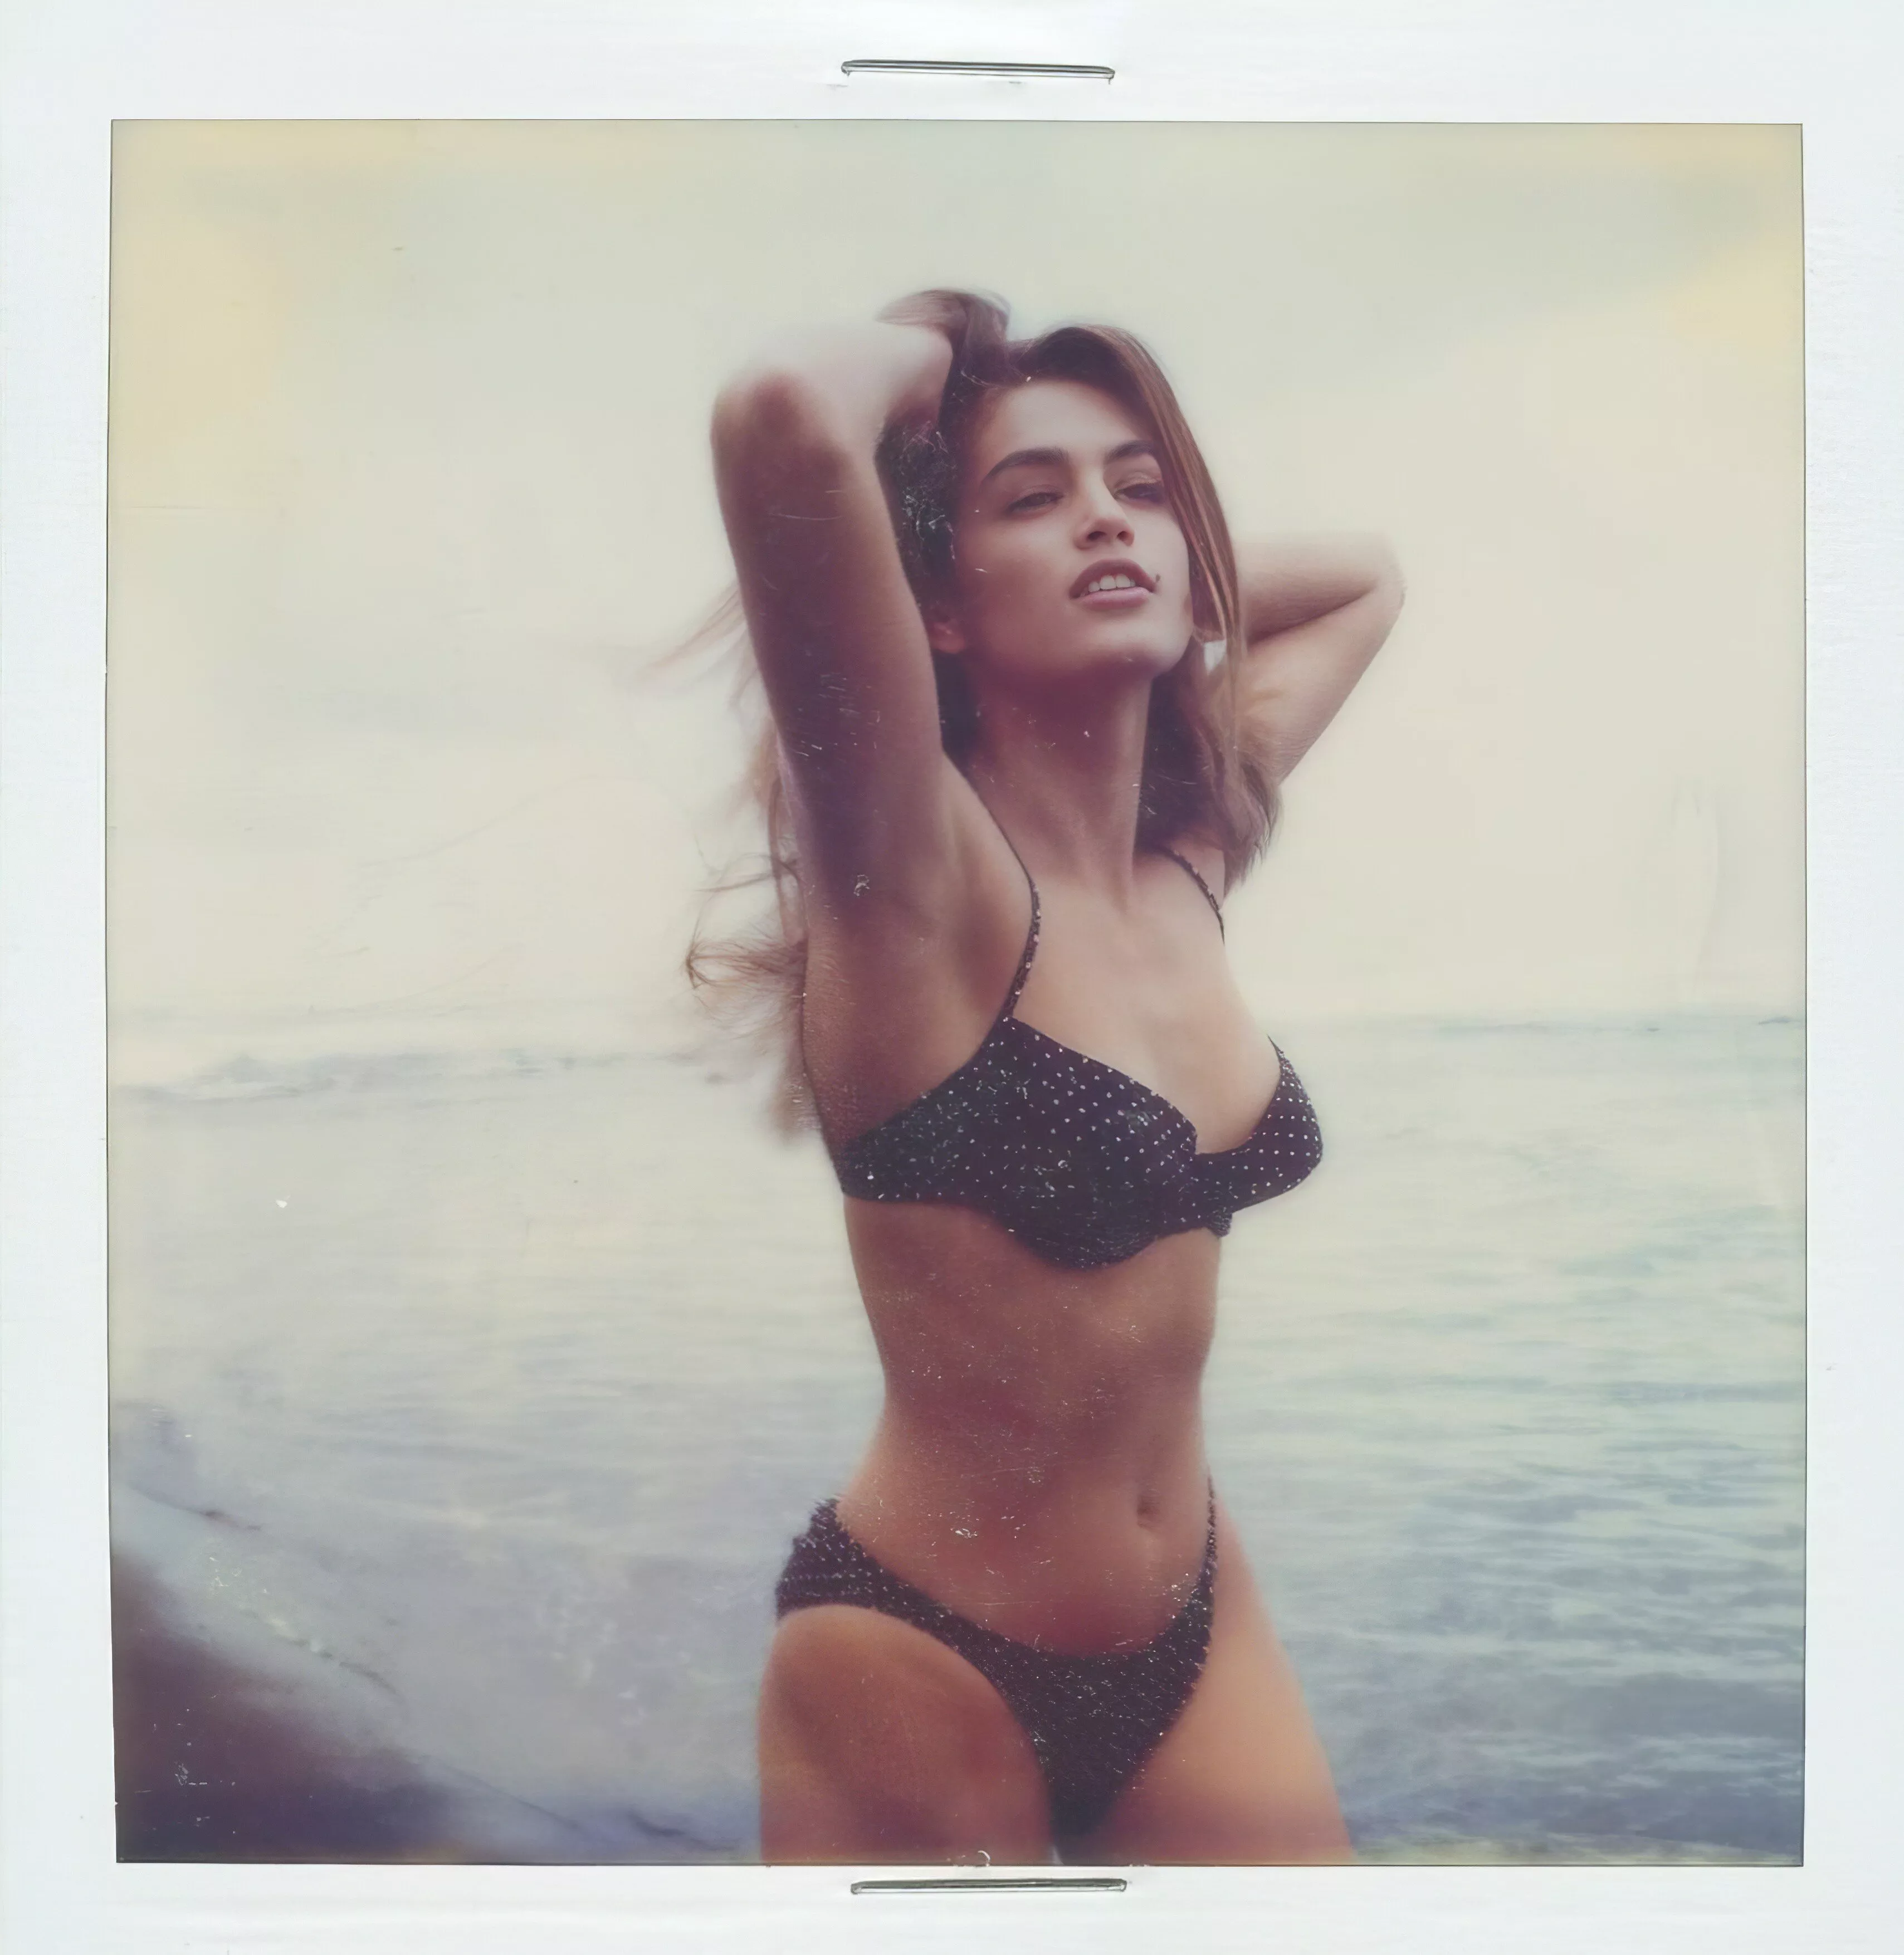 Cindy Crawford 1988, Ritts test polaroid for playboy nudes OldSchoolCoolNSFW NUDE-PICS photo